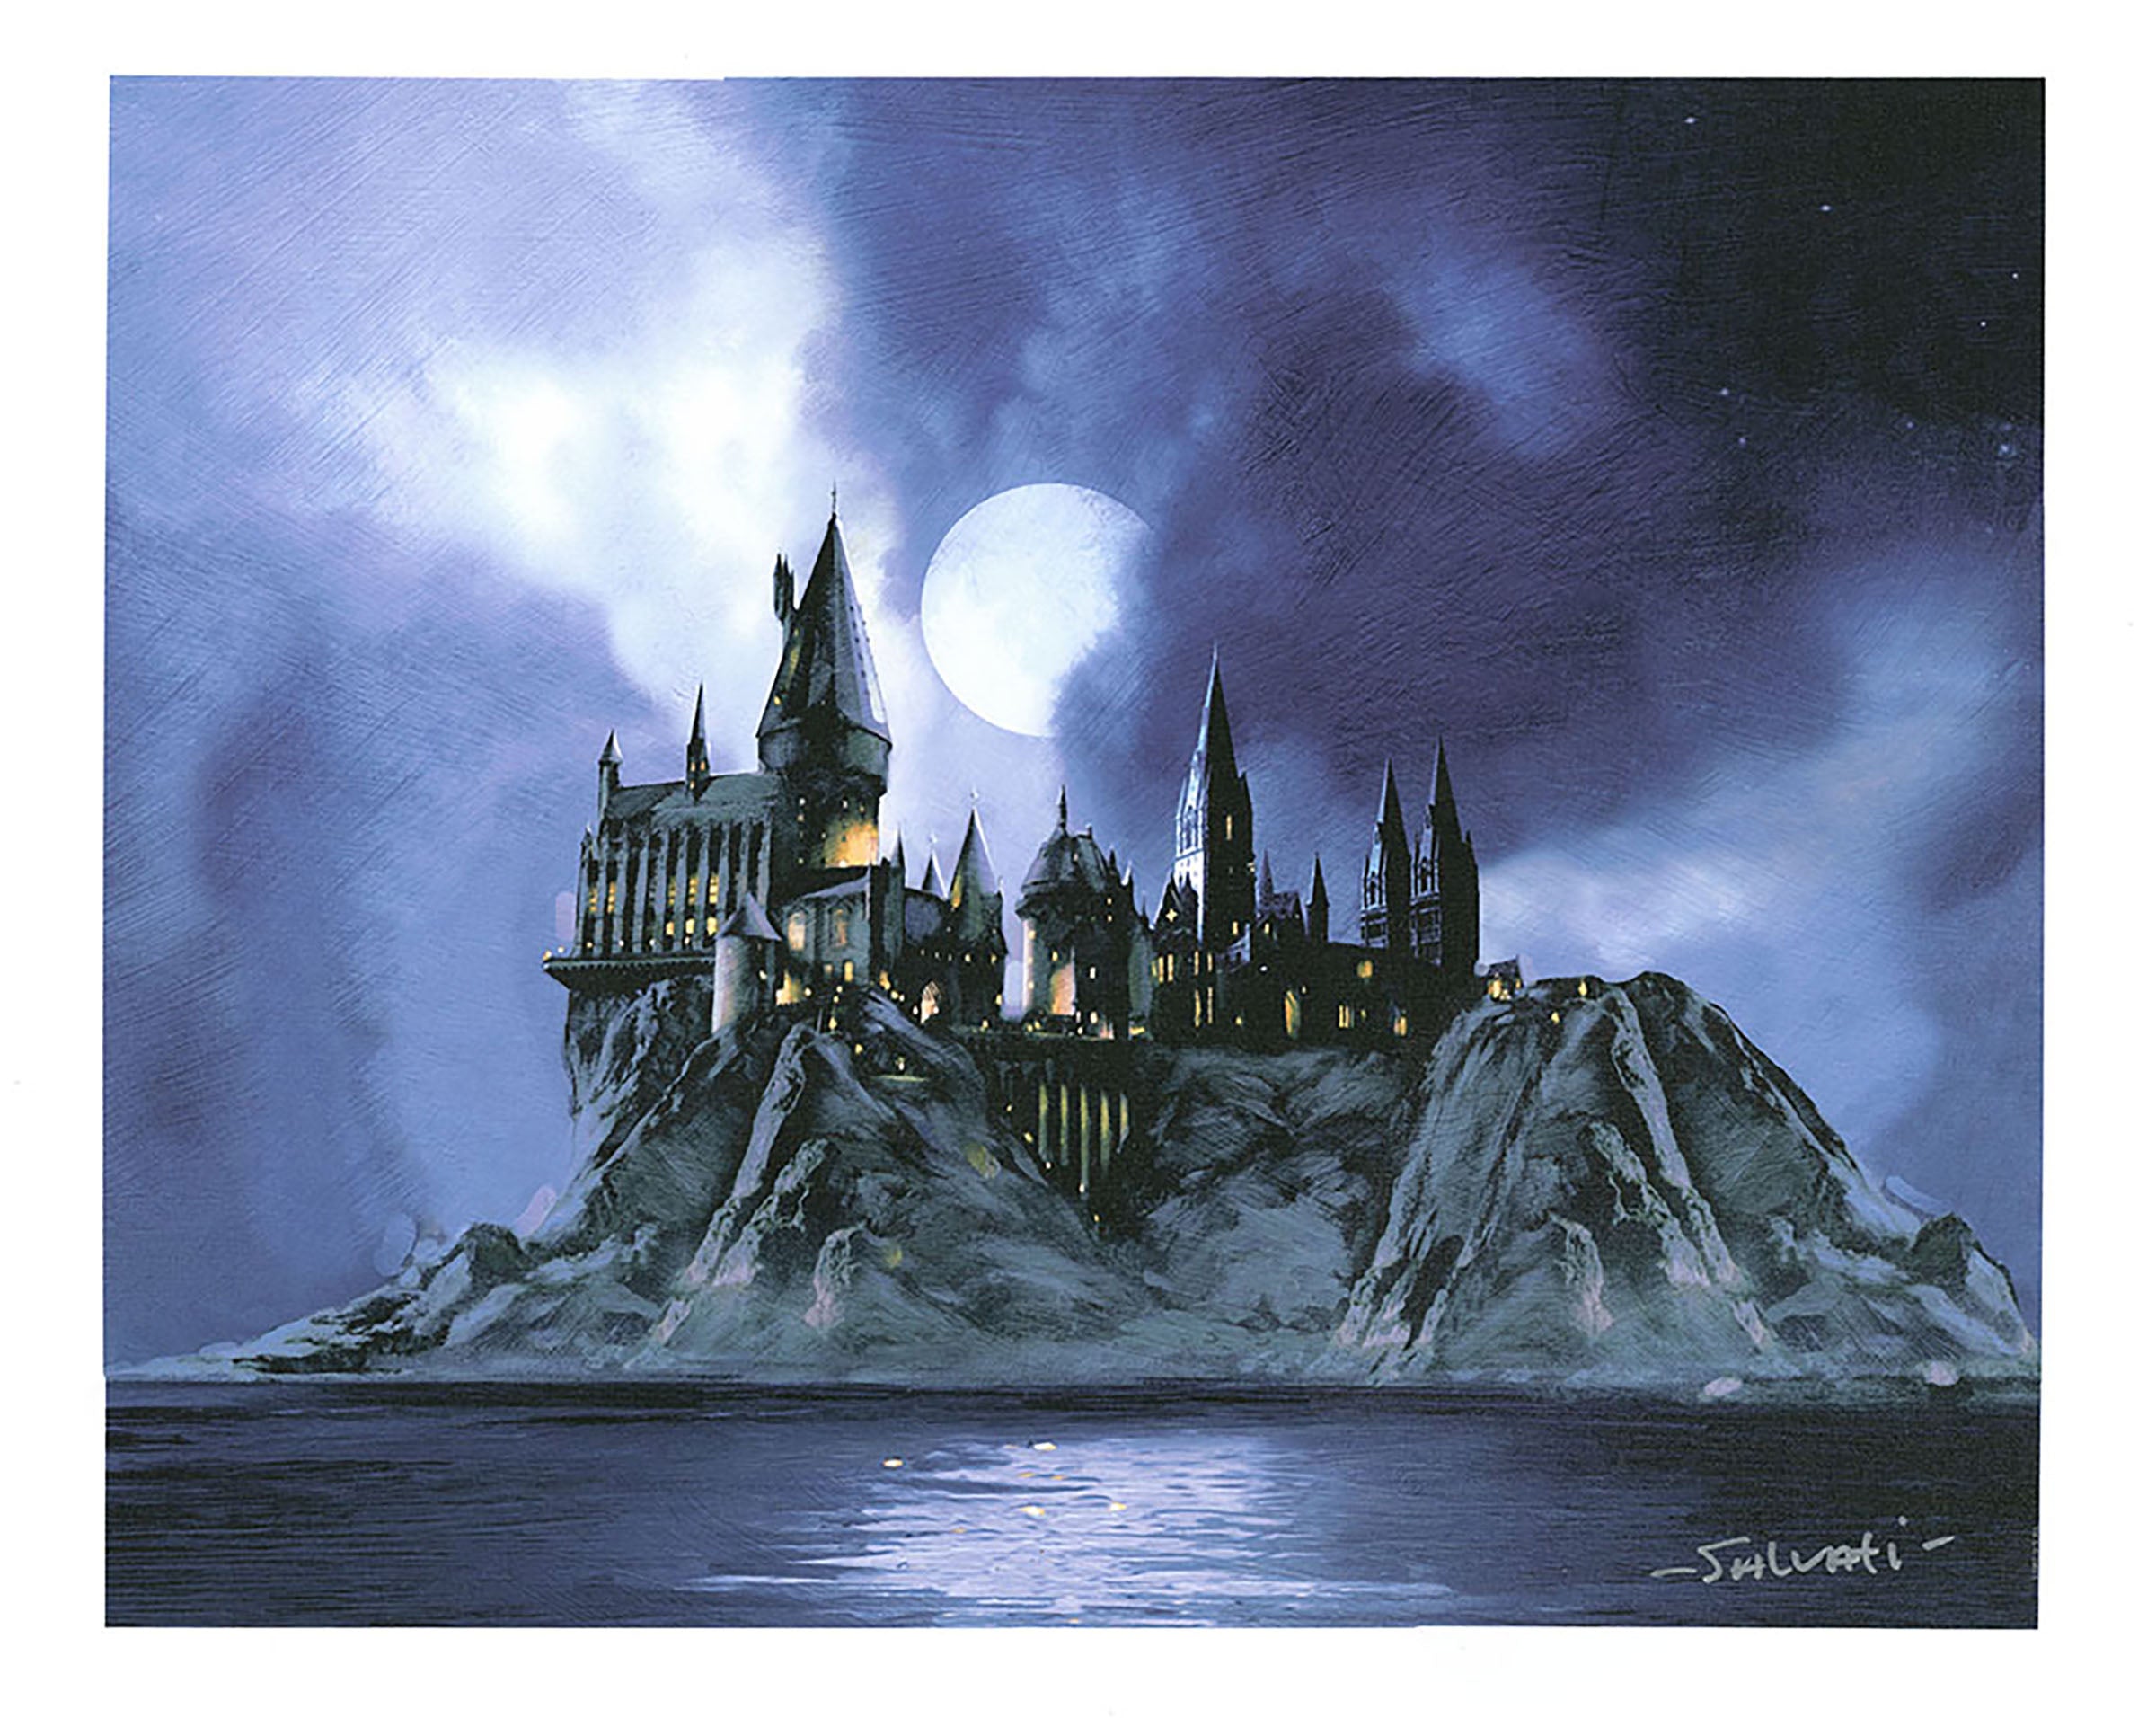 Completed 'Moon over Hogwarts' today! This has been my favorite